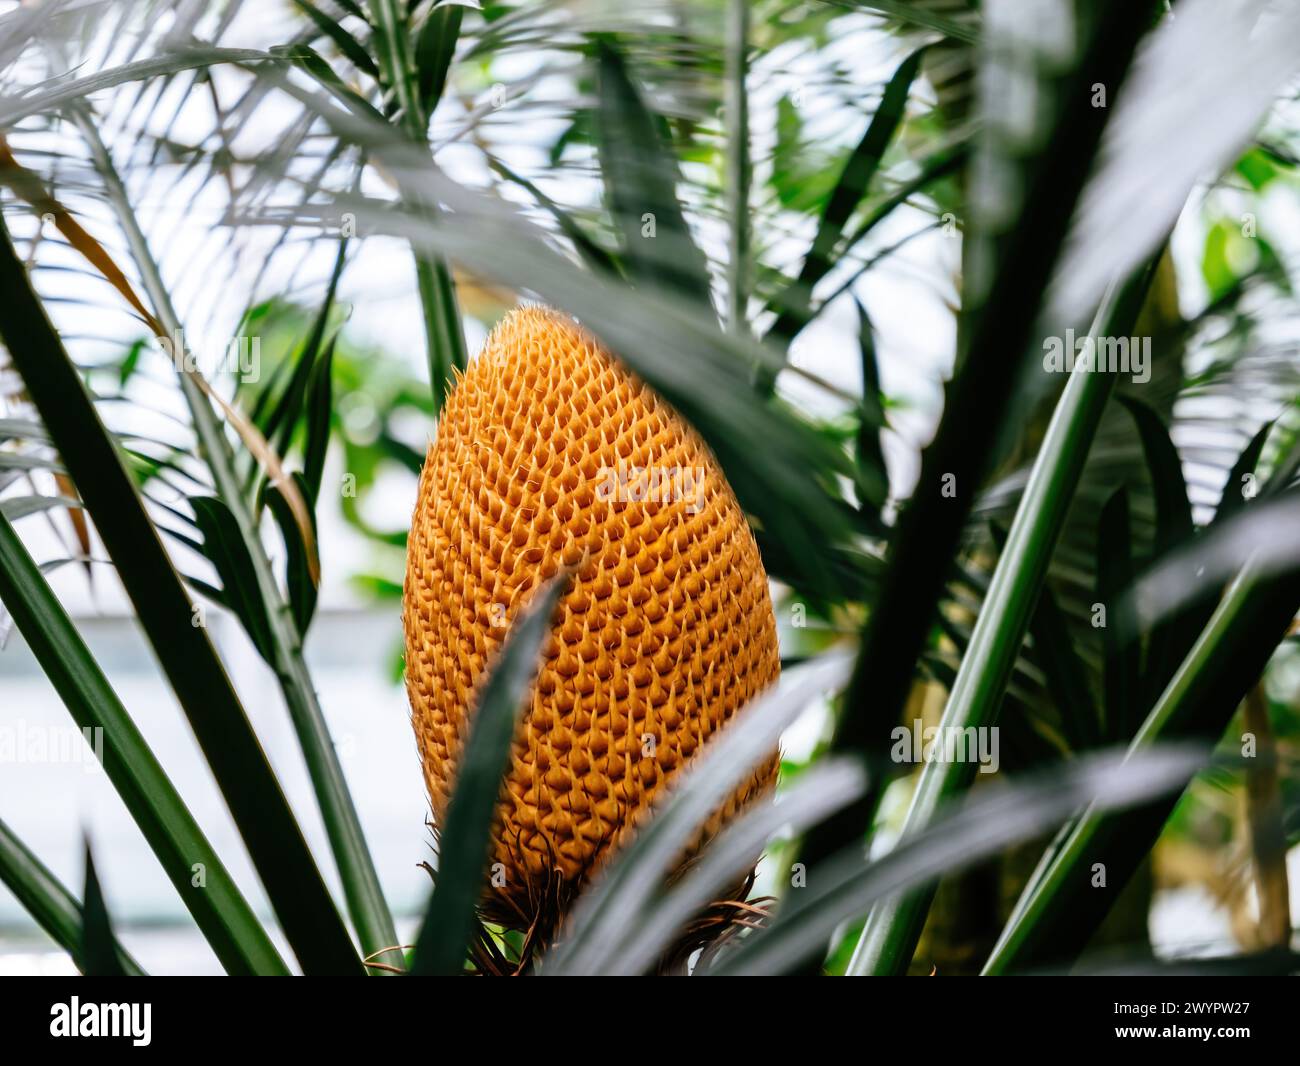 Lush cycad cone emerging amidst spiky green fronds, capturing the exotic essence of a tropical garden in vibrant detail - Cycas circinalis Stock Photo